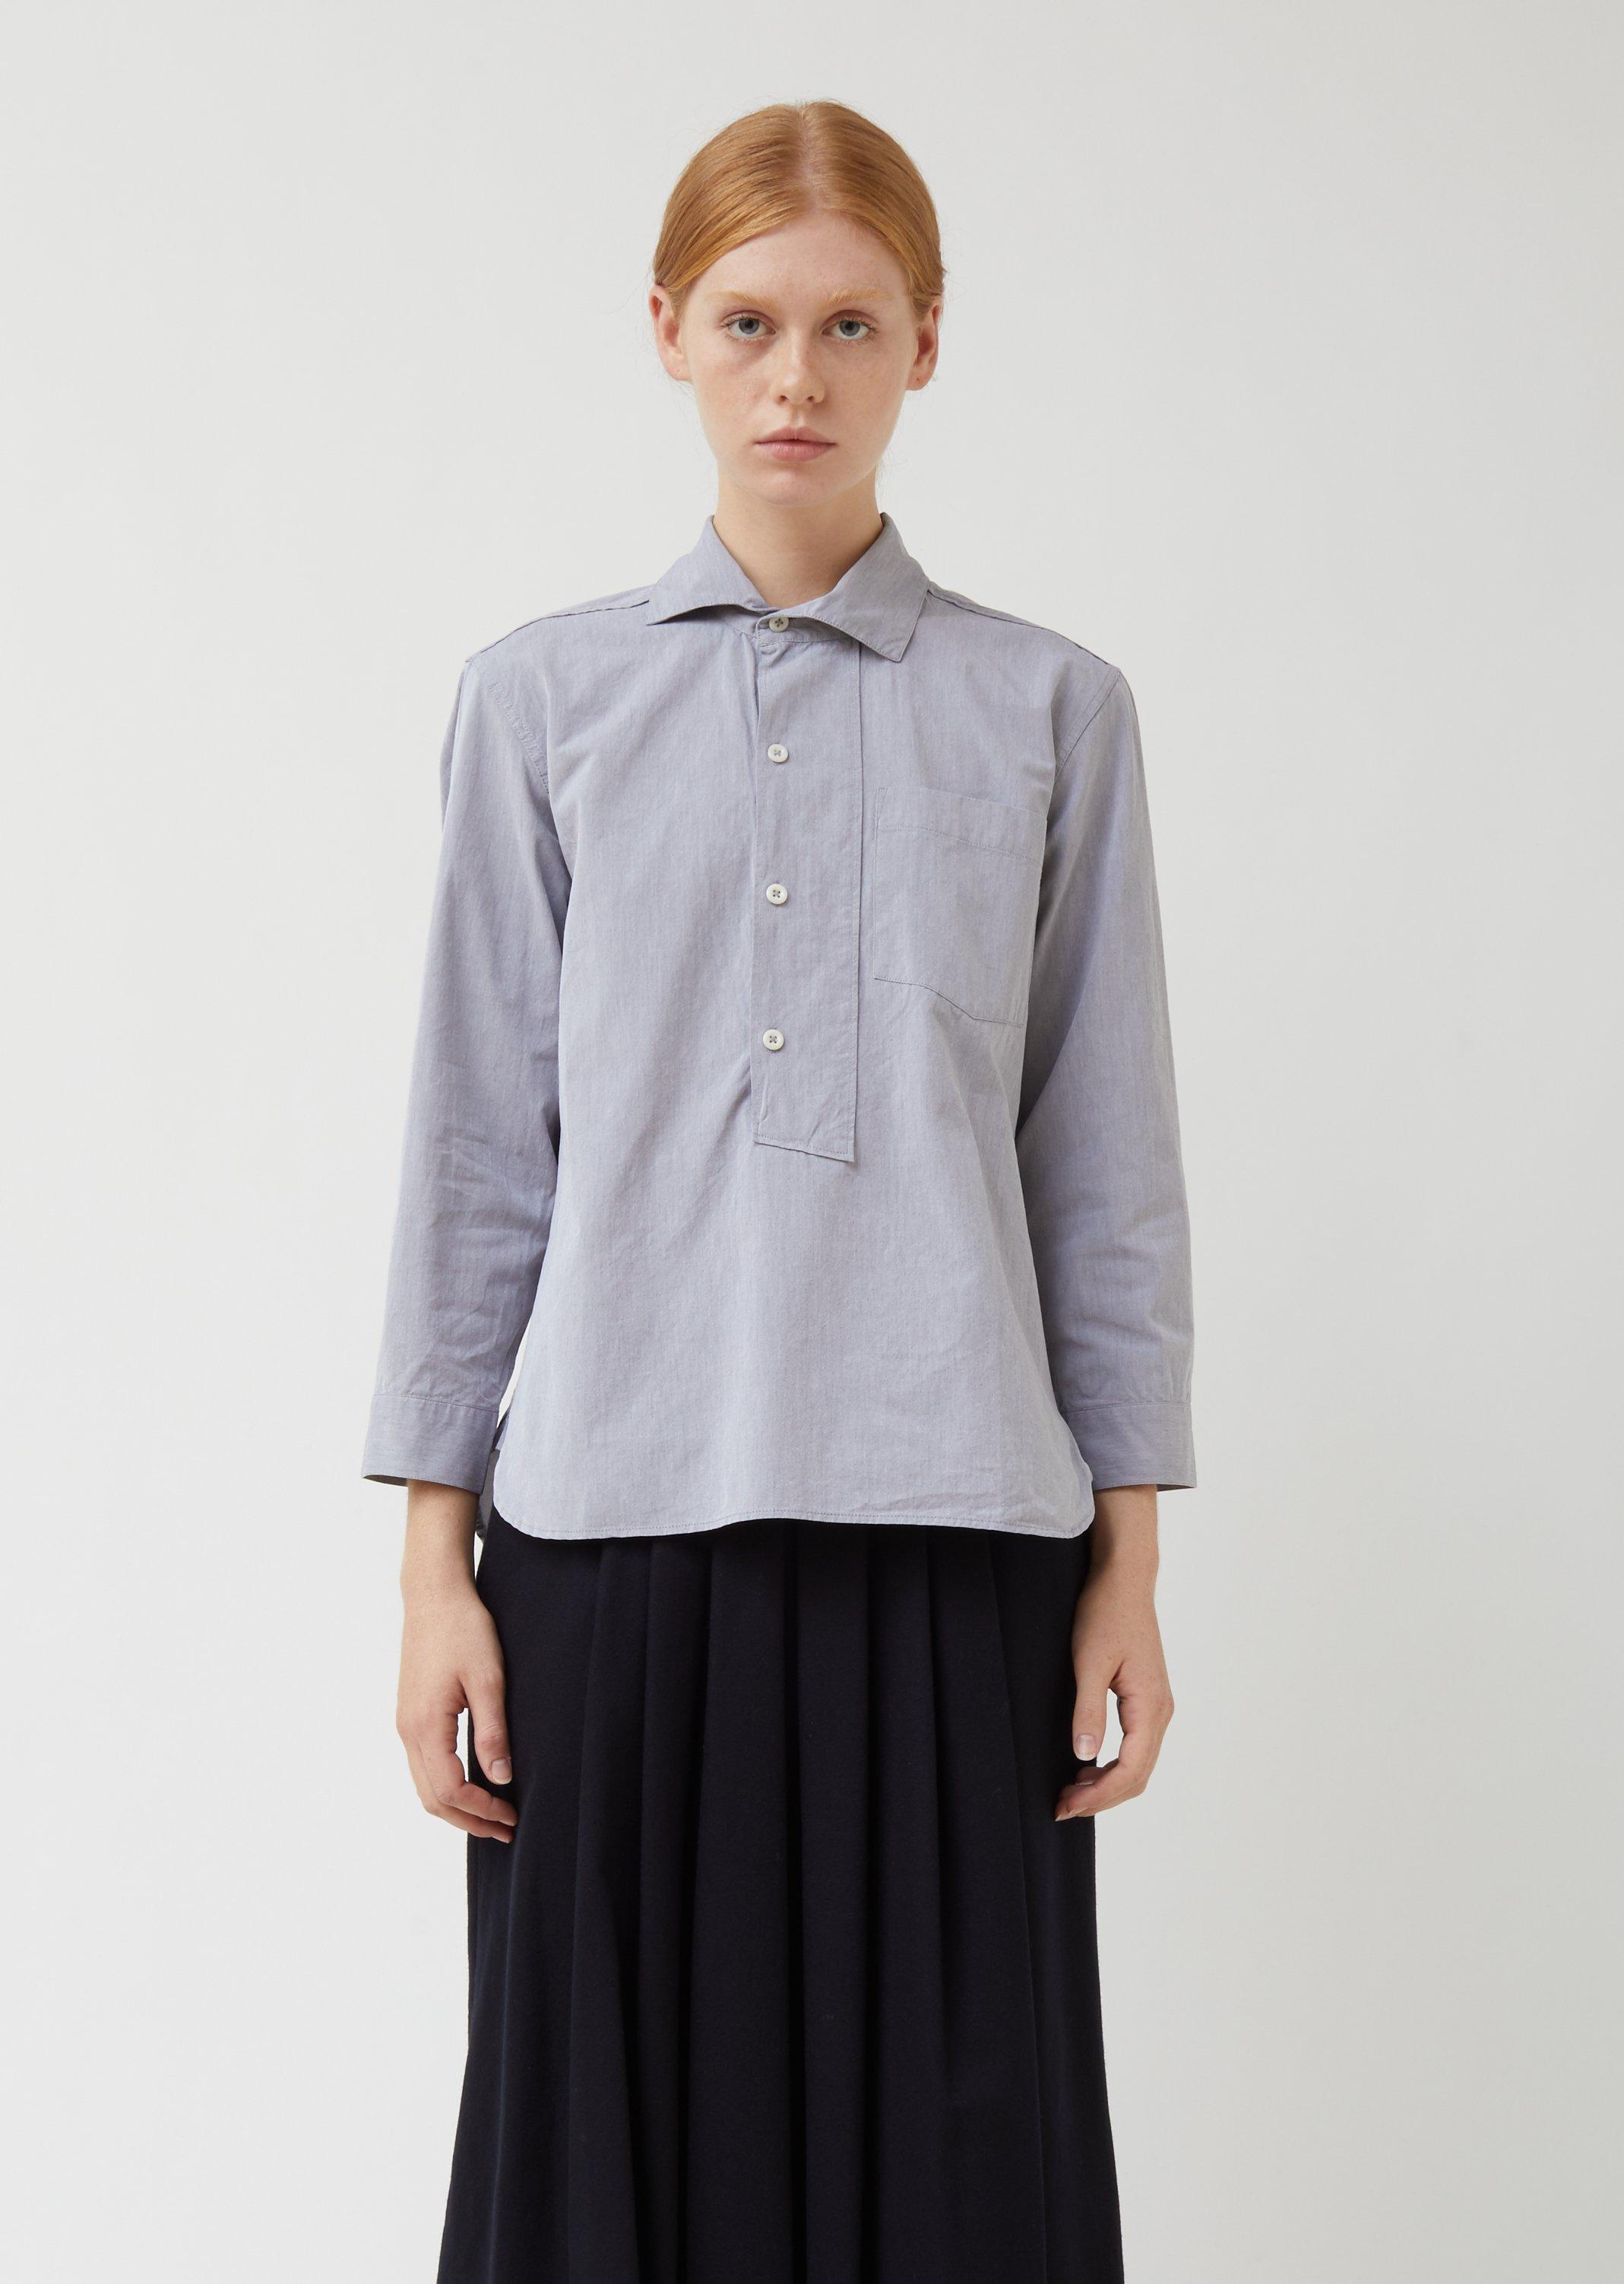 MHL by Margaret Howell Cotton Mhl Asymmetric Collared Shirt in Pewter ...